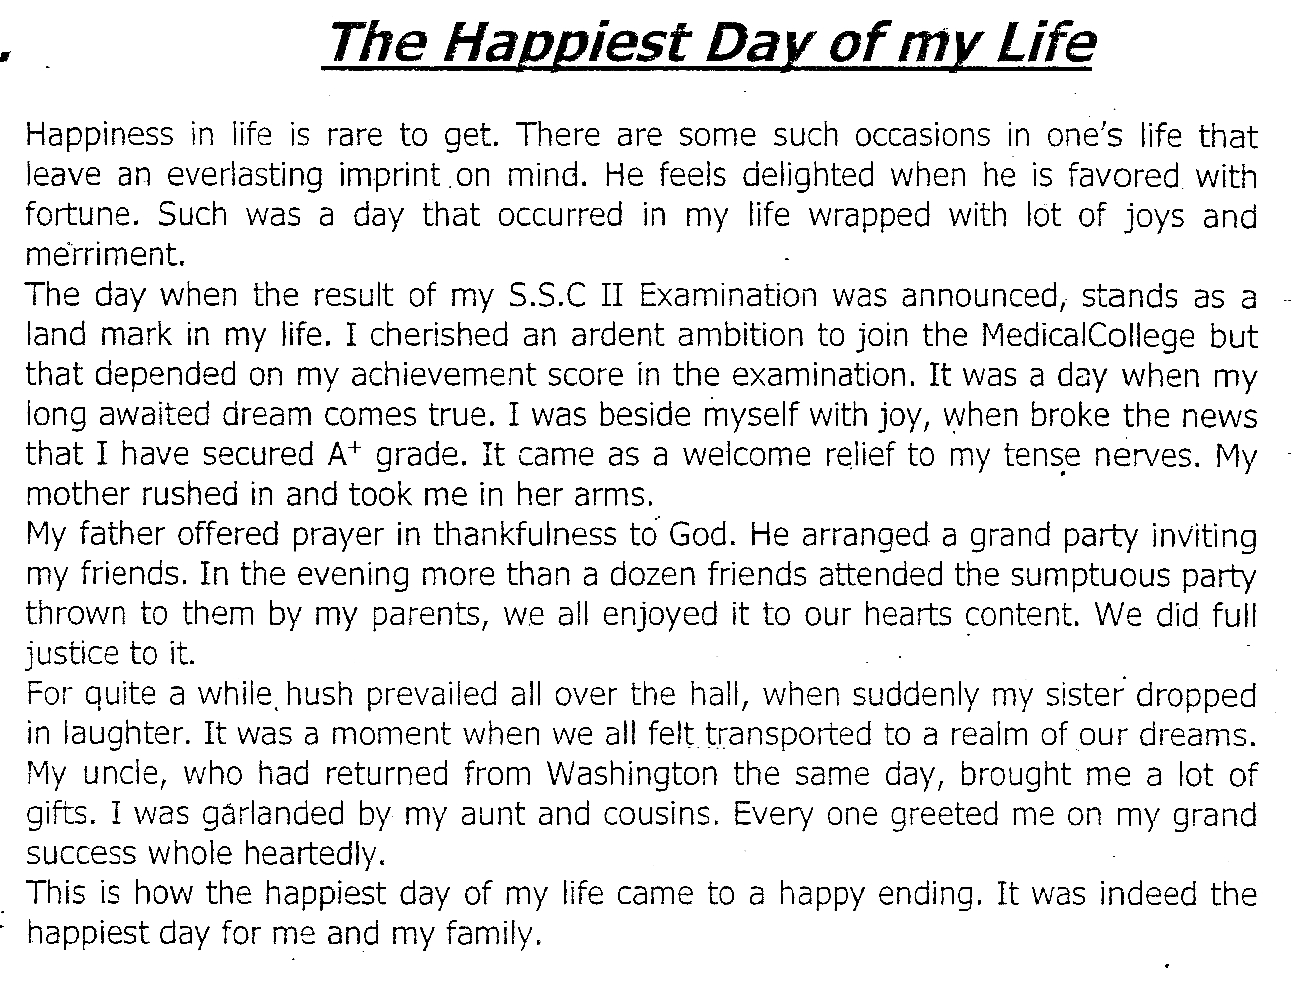 the best day of my life essay example